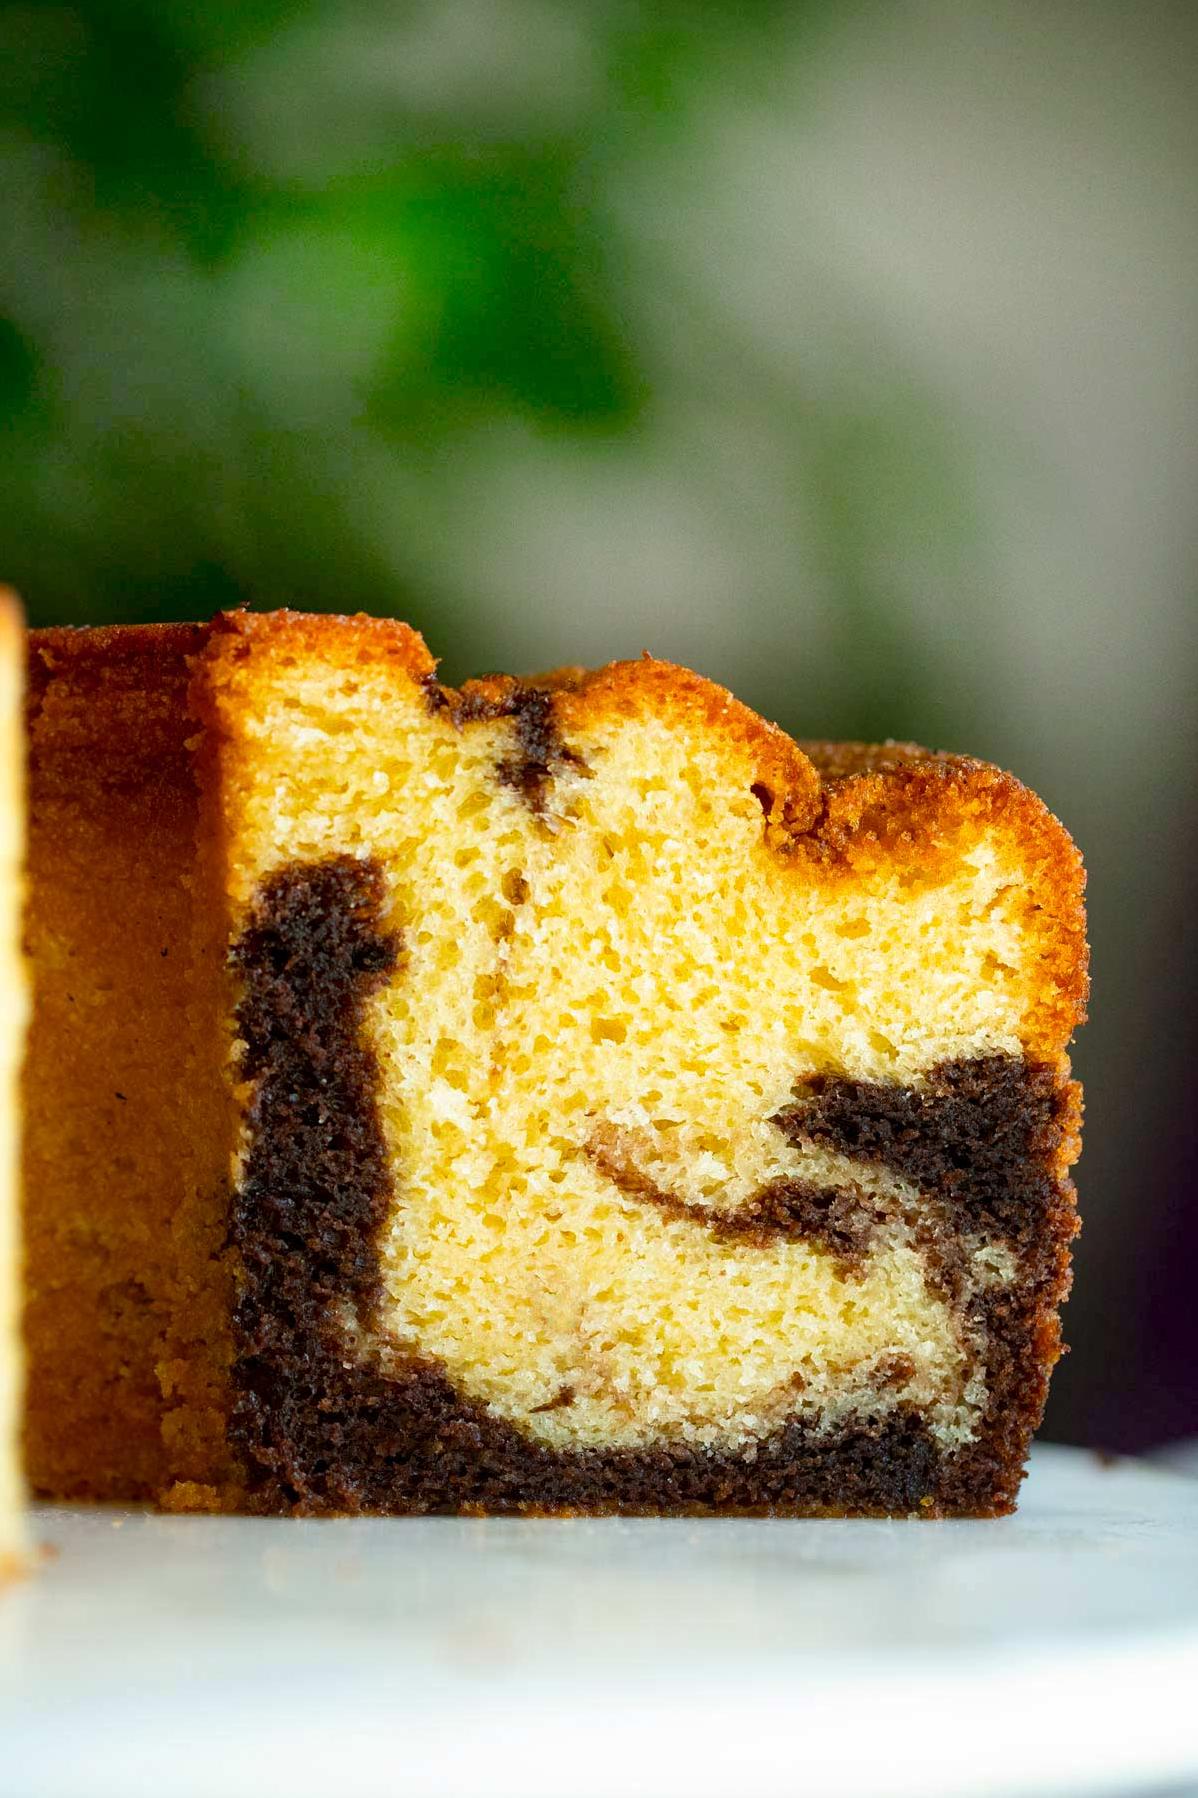  Butterscotch lovers, you won't want to miss out on this incredible pound cake.